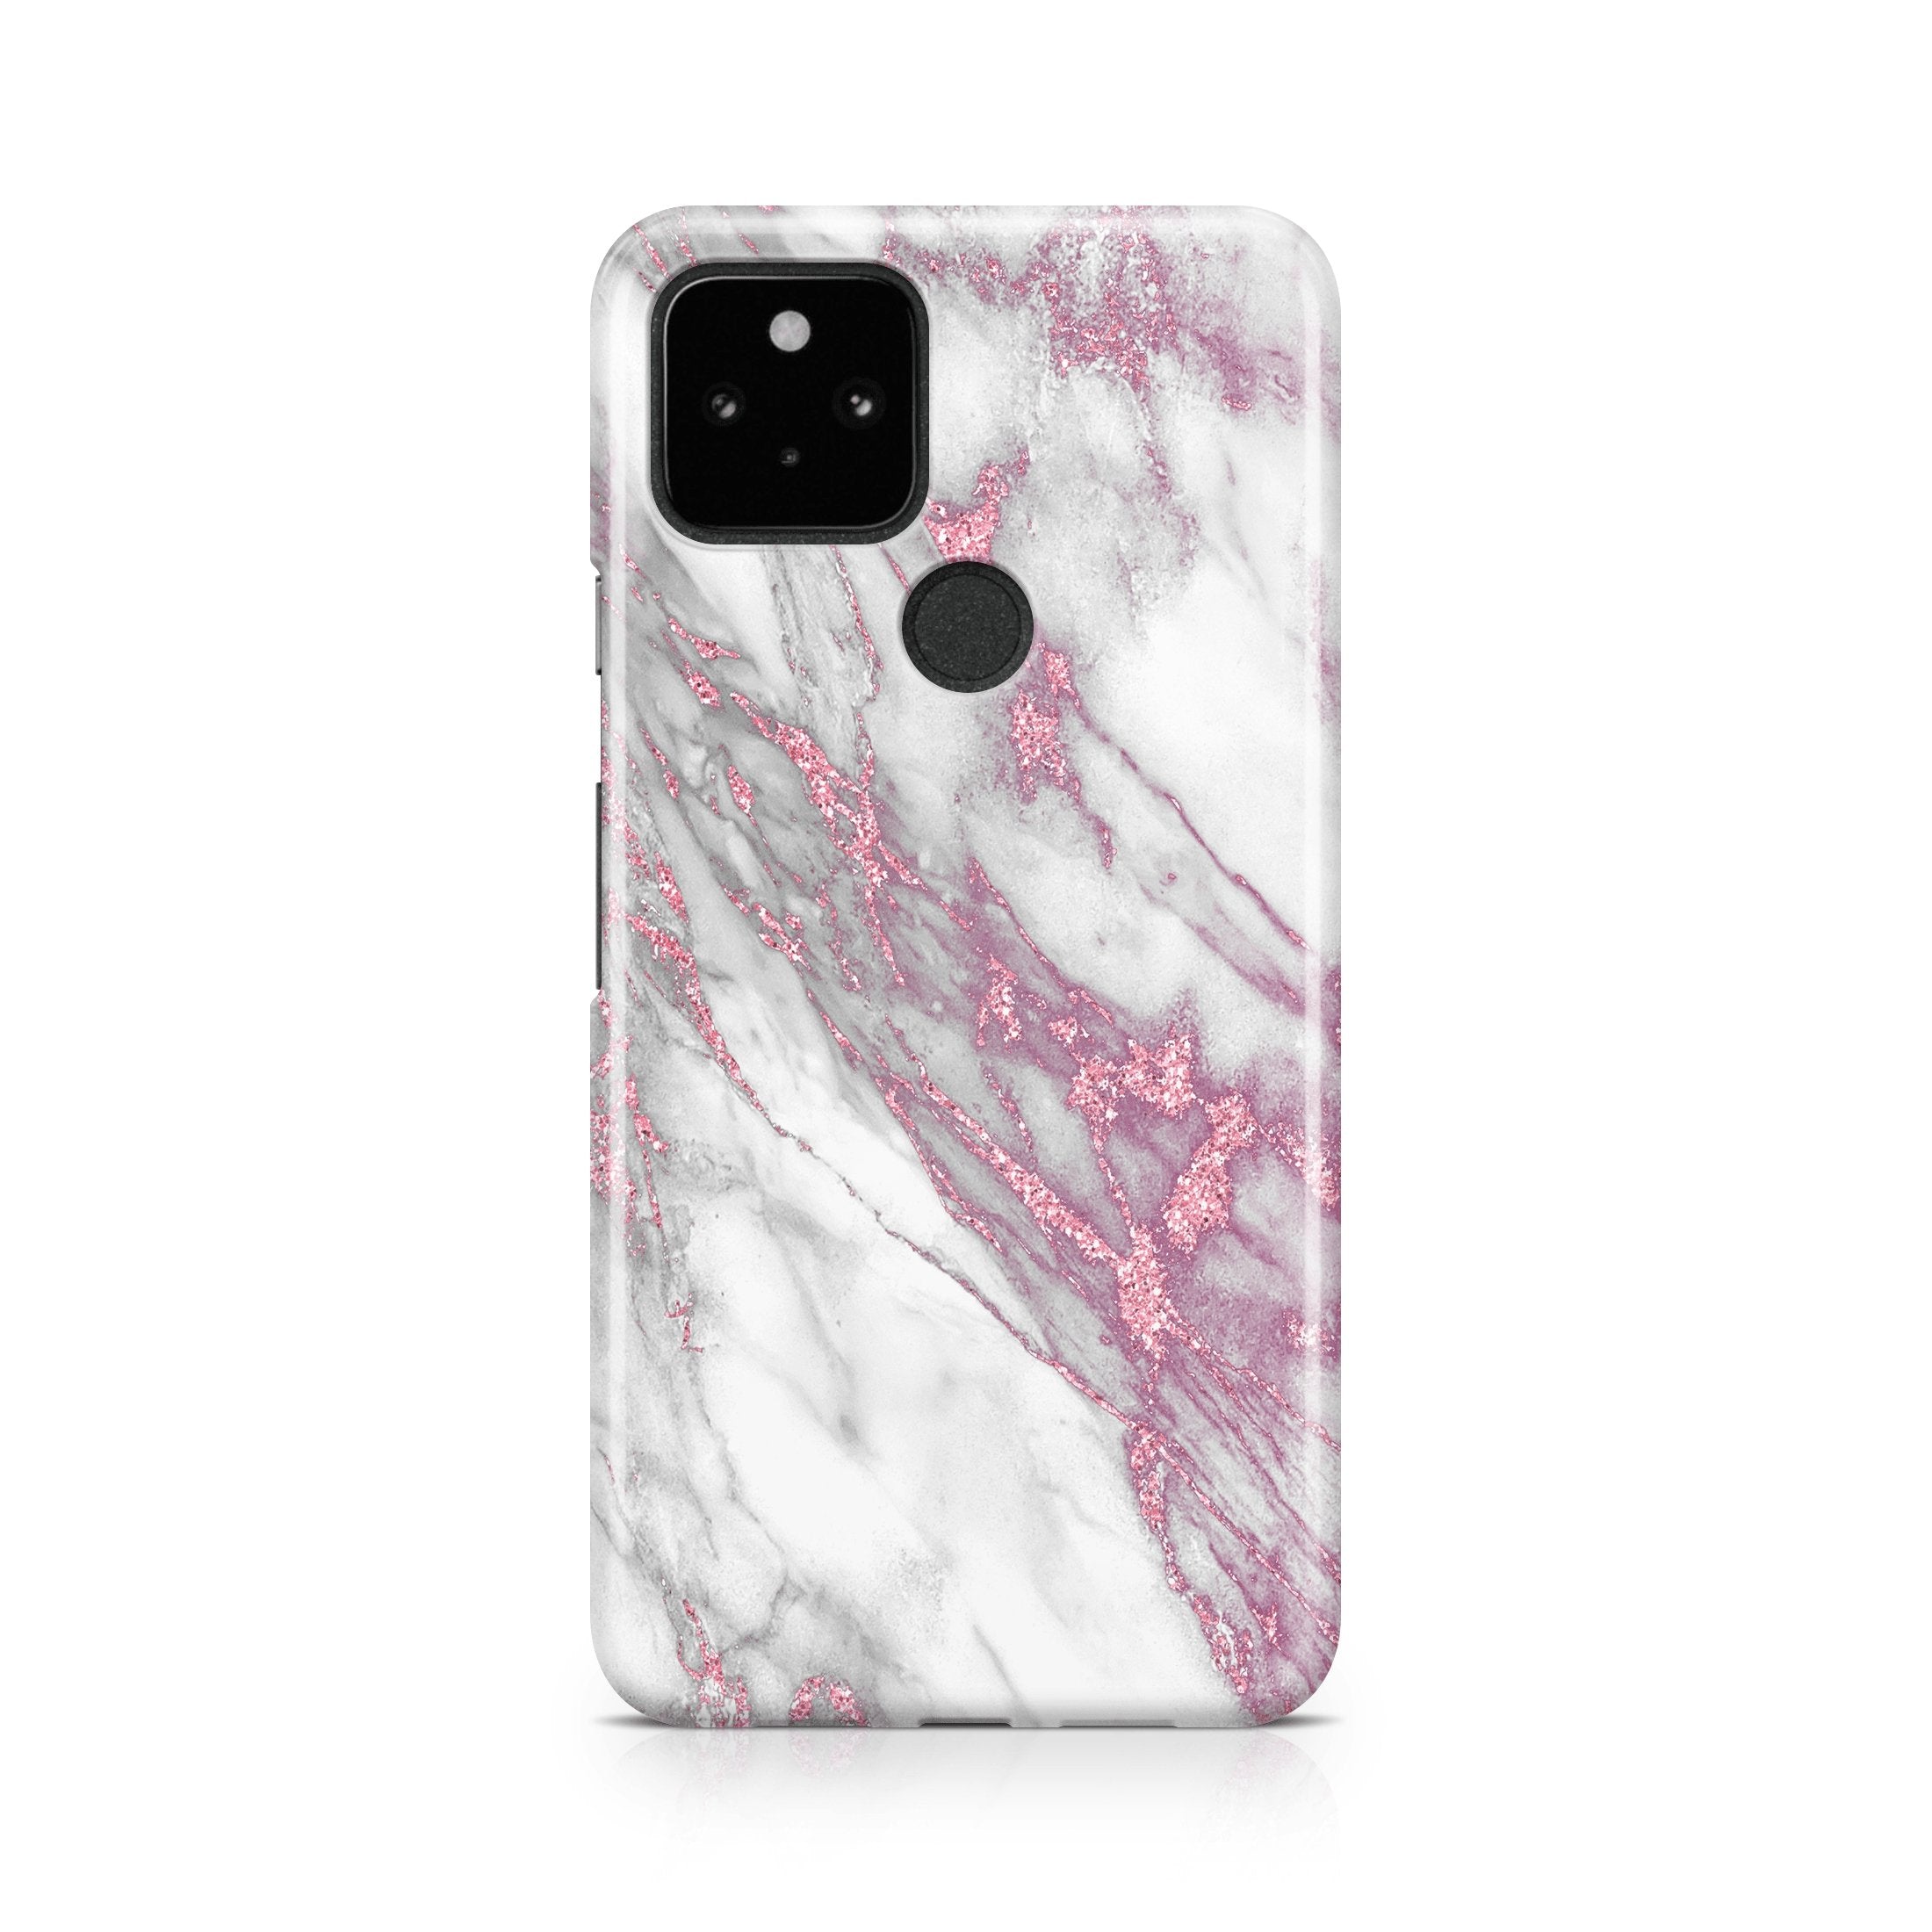 Pink & White Marble - Google phone case designs by CaseSwagger